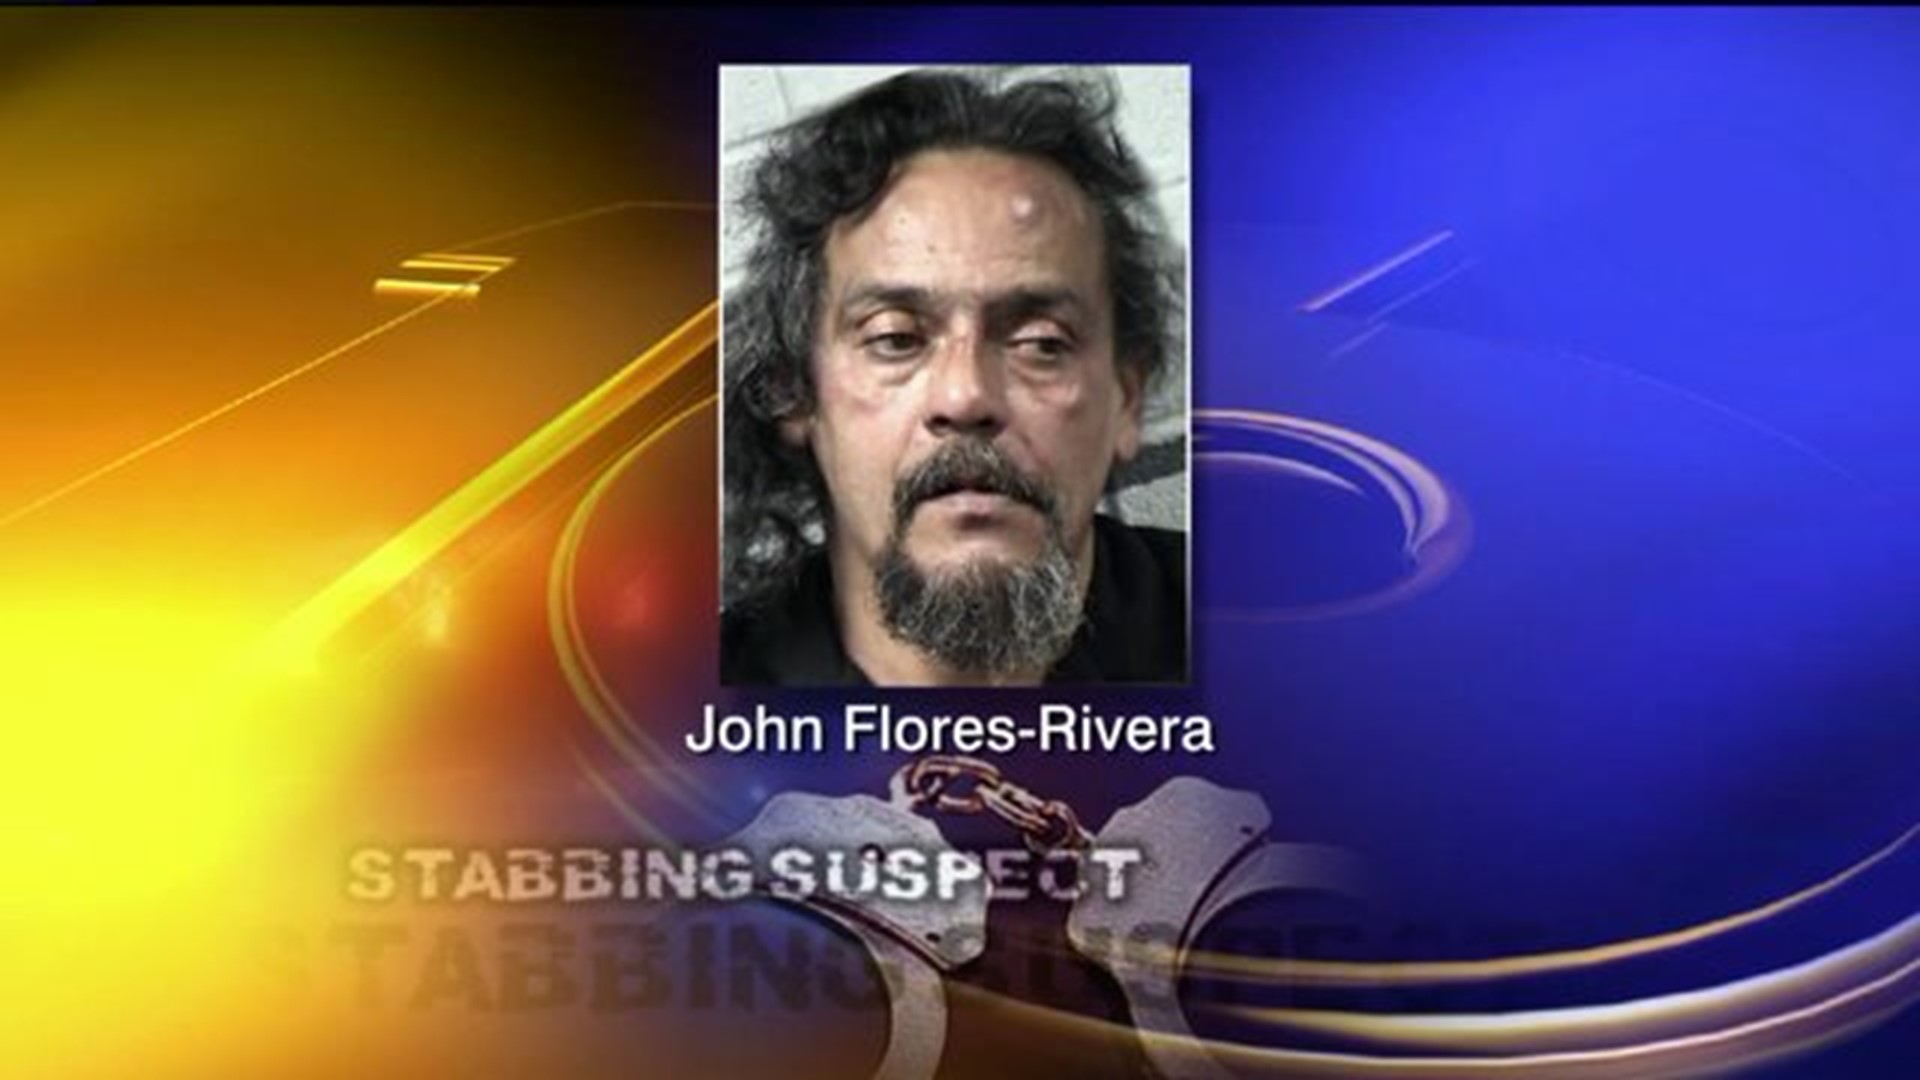 Stabbing Charges Filed After Domestic Dispute